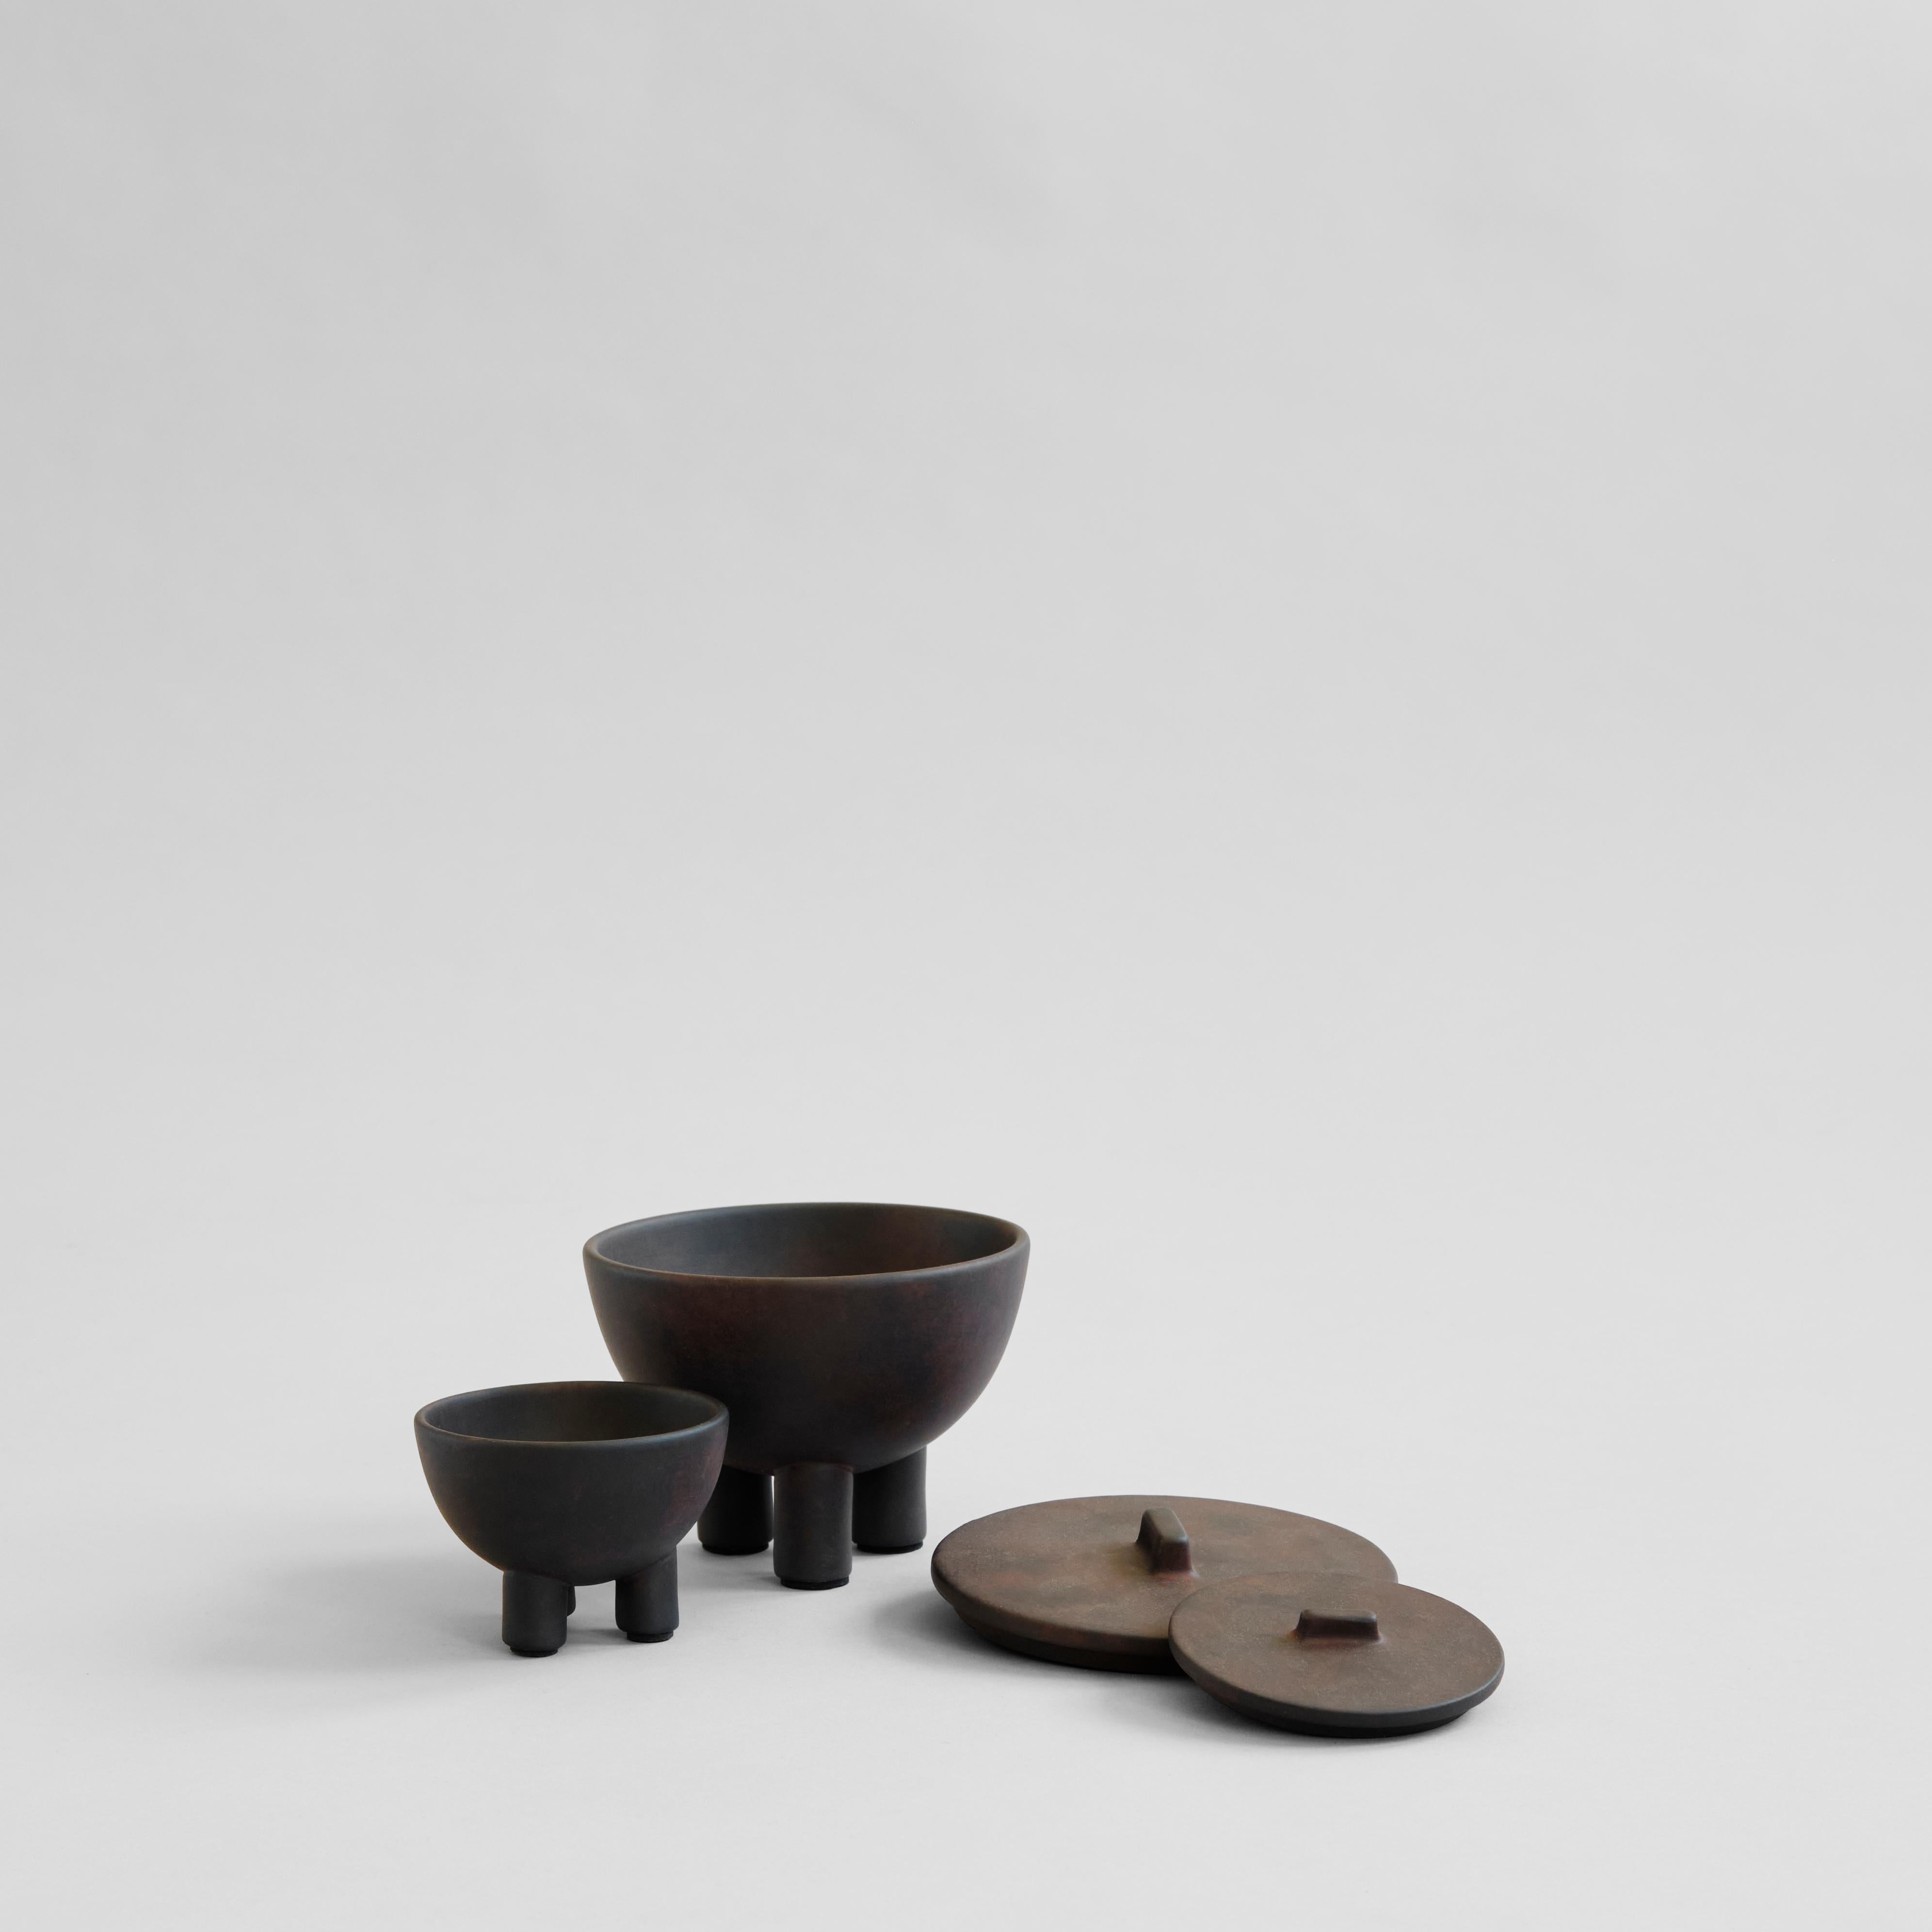 A set of 4 coffee duck jar Medio by 101 Copenhagen
Designed by Kristian Sofus Hansen & Tommy Hyldahl
Dimensions: L12 / W12 / H9,5 CM
Materials: Ceramic

Reminiscent of little, individual three-legged characters or friendly creatures, the Duck